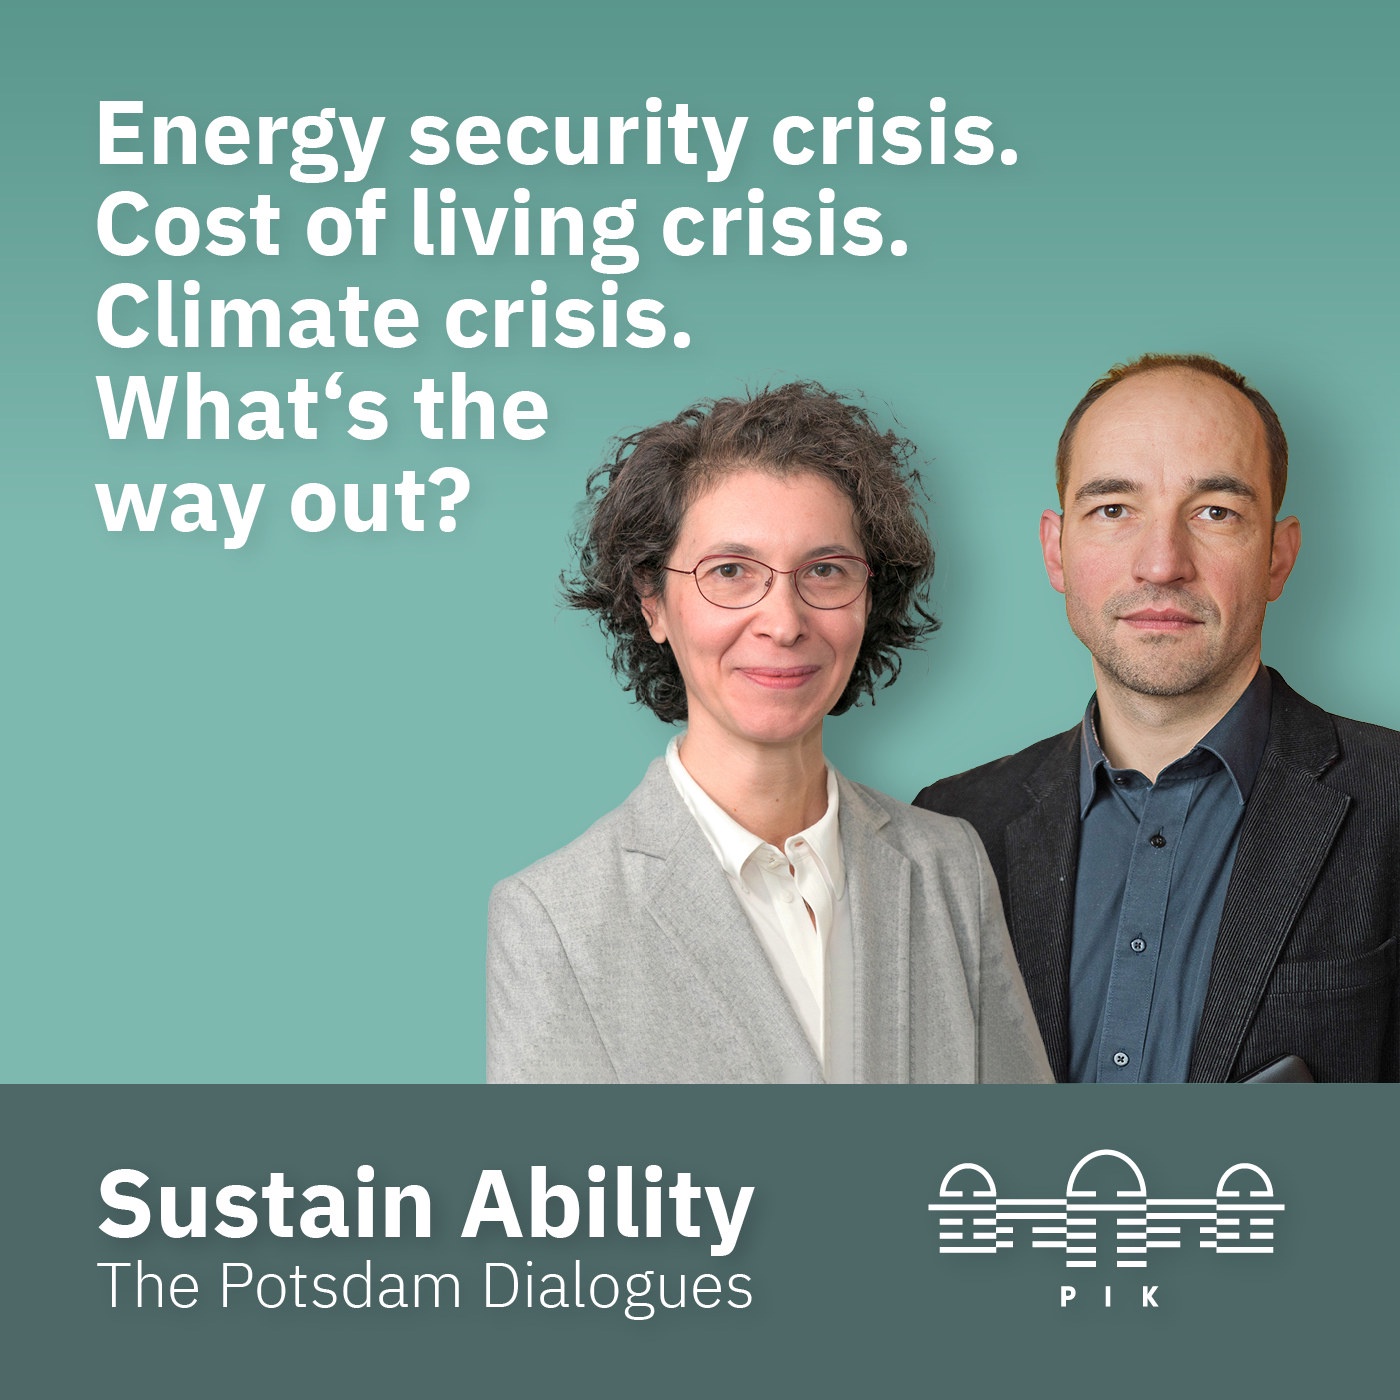 Energy security crisis. Cost of living crisis. Climate Crisis. What's the way out?